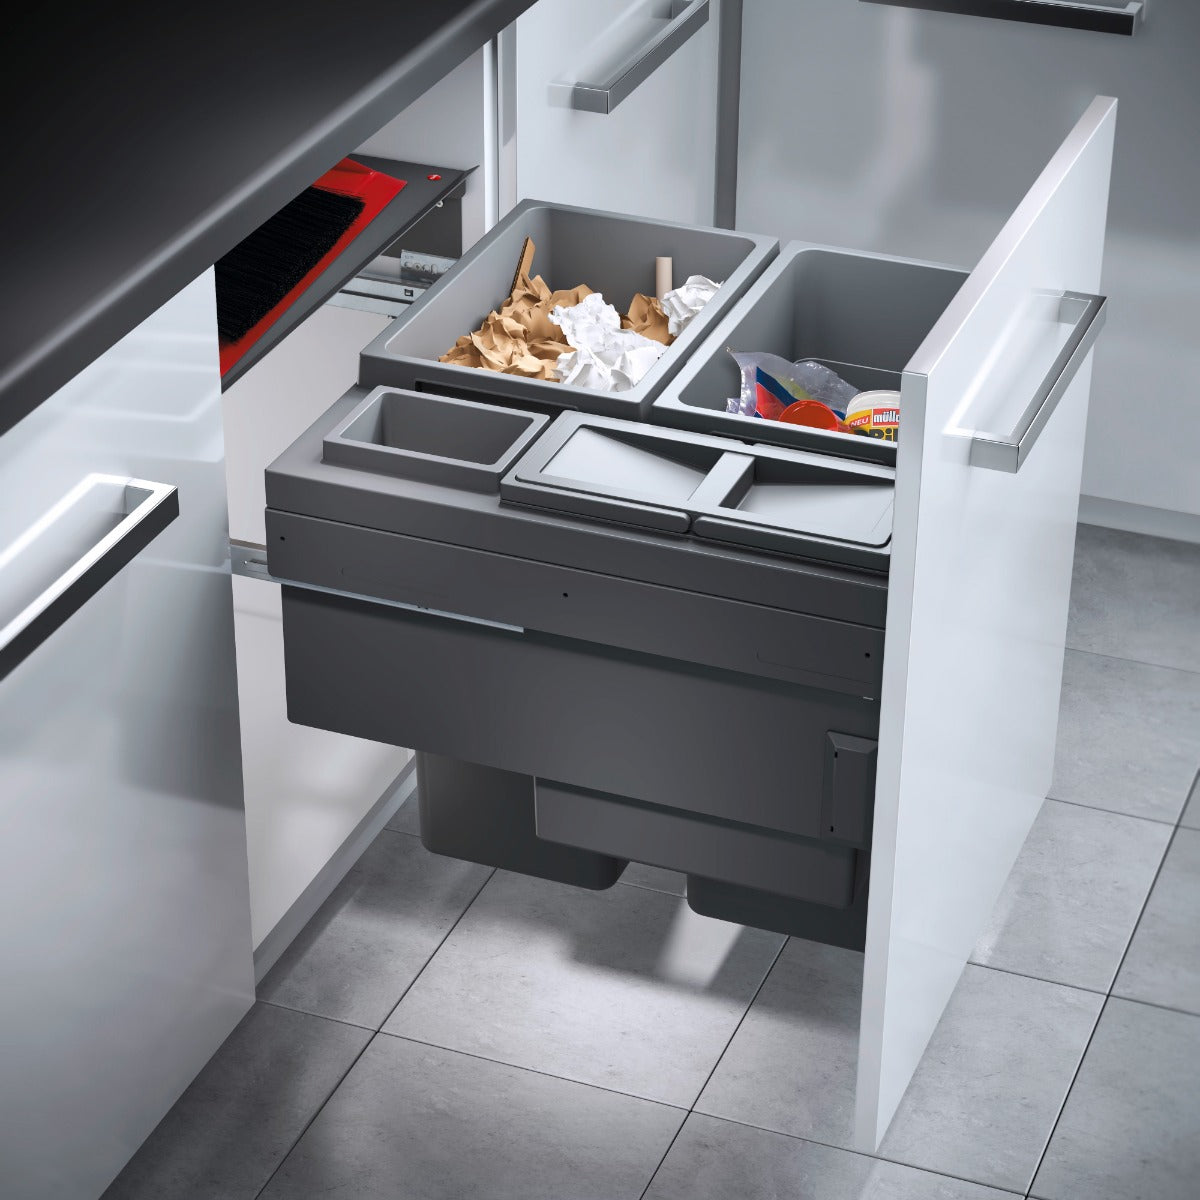 Hailo Euro Cargo 4 Compartment 90L integrated kitchen recycling bin for easy recycling and waste sorting